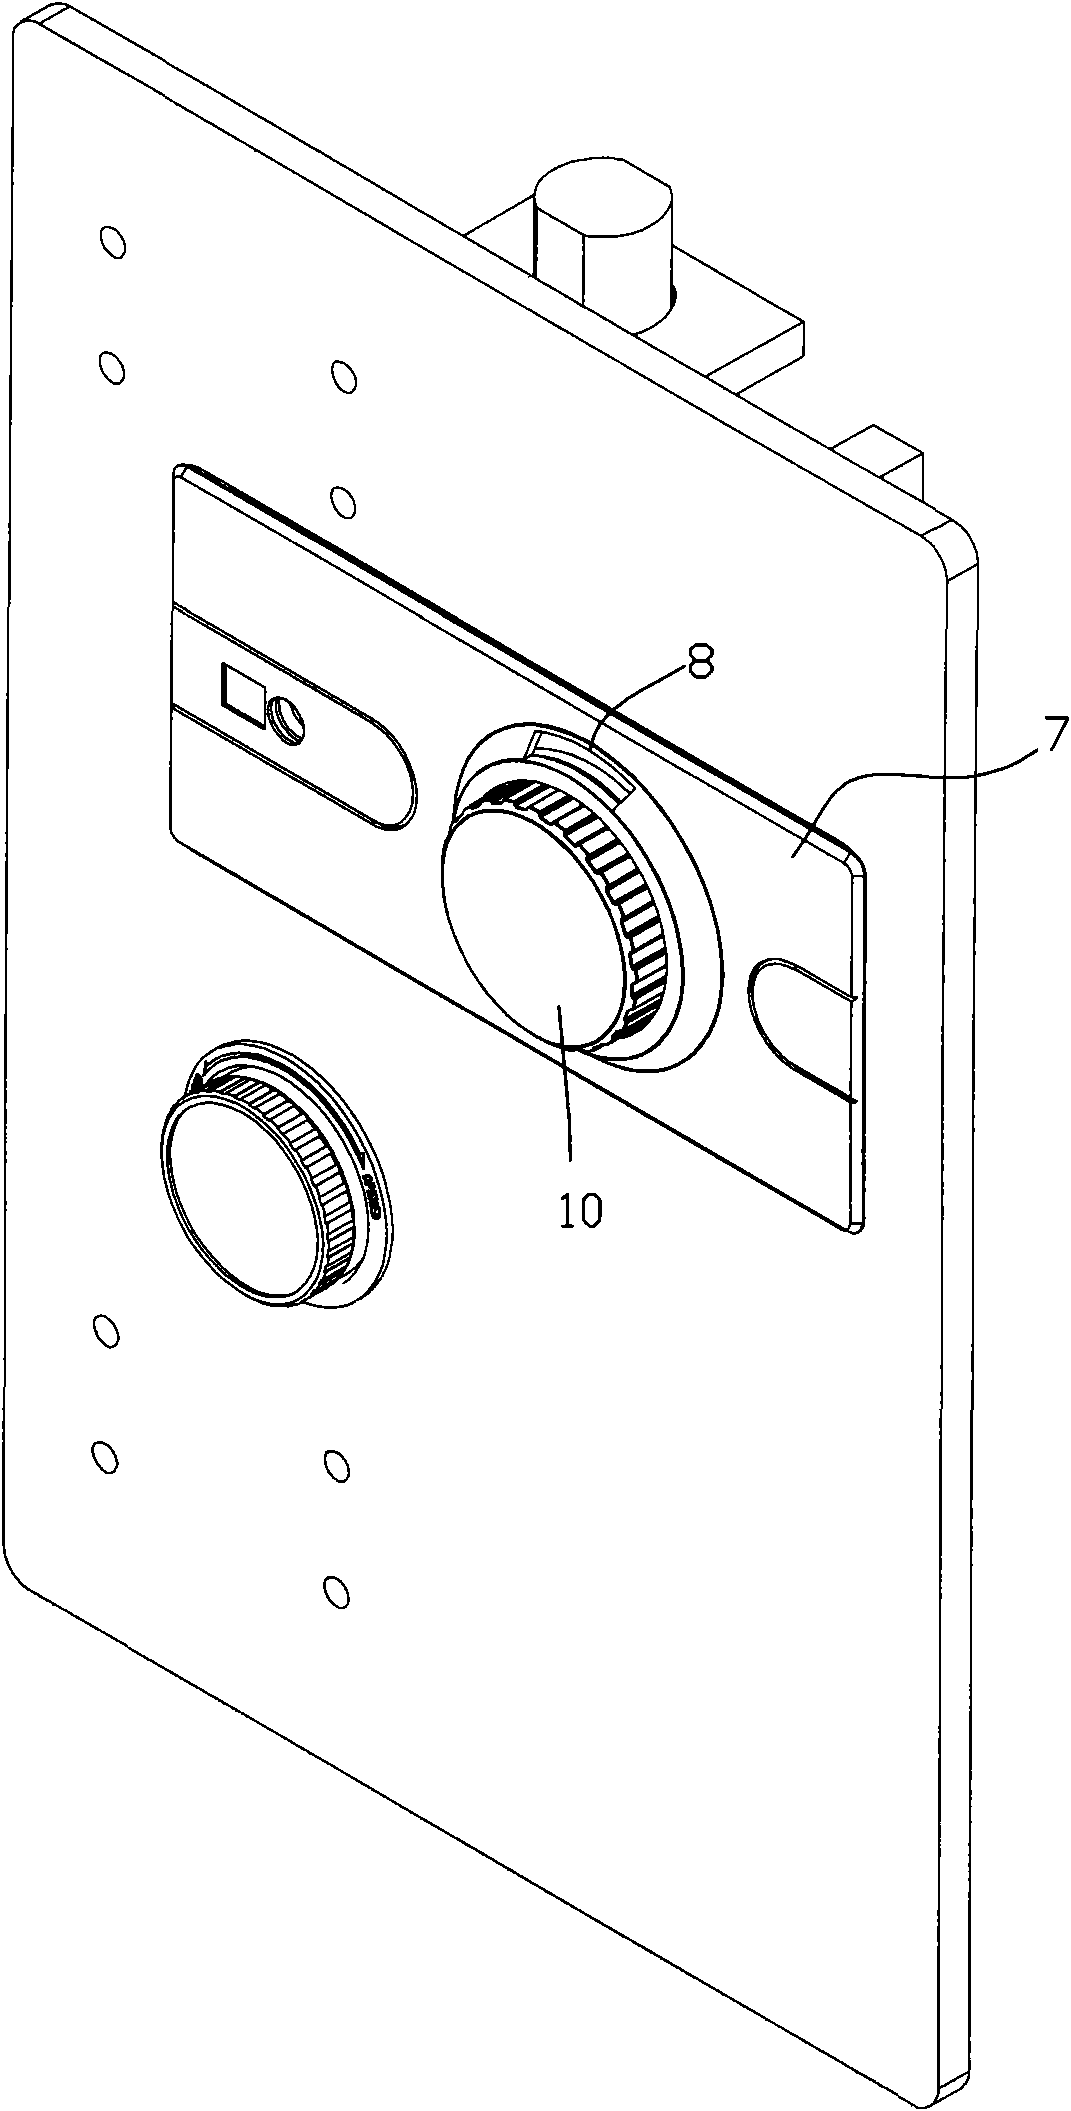 Contractible mechanical coded lock device